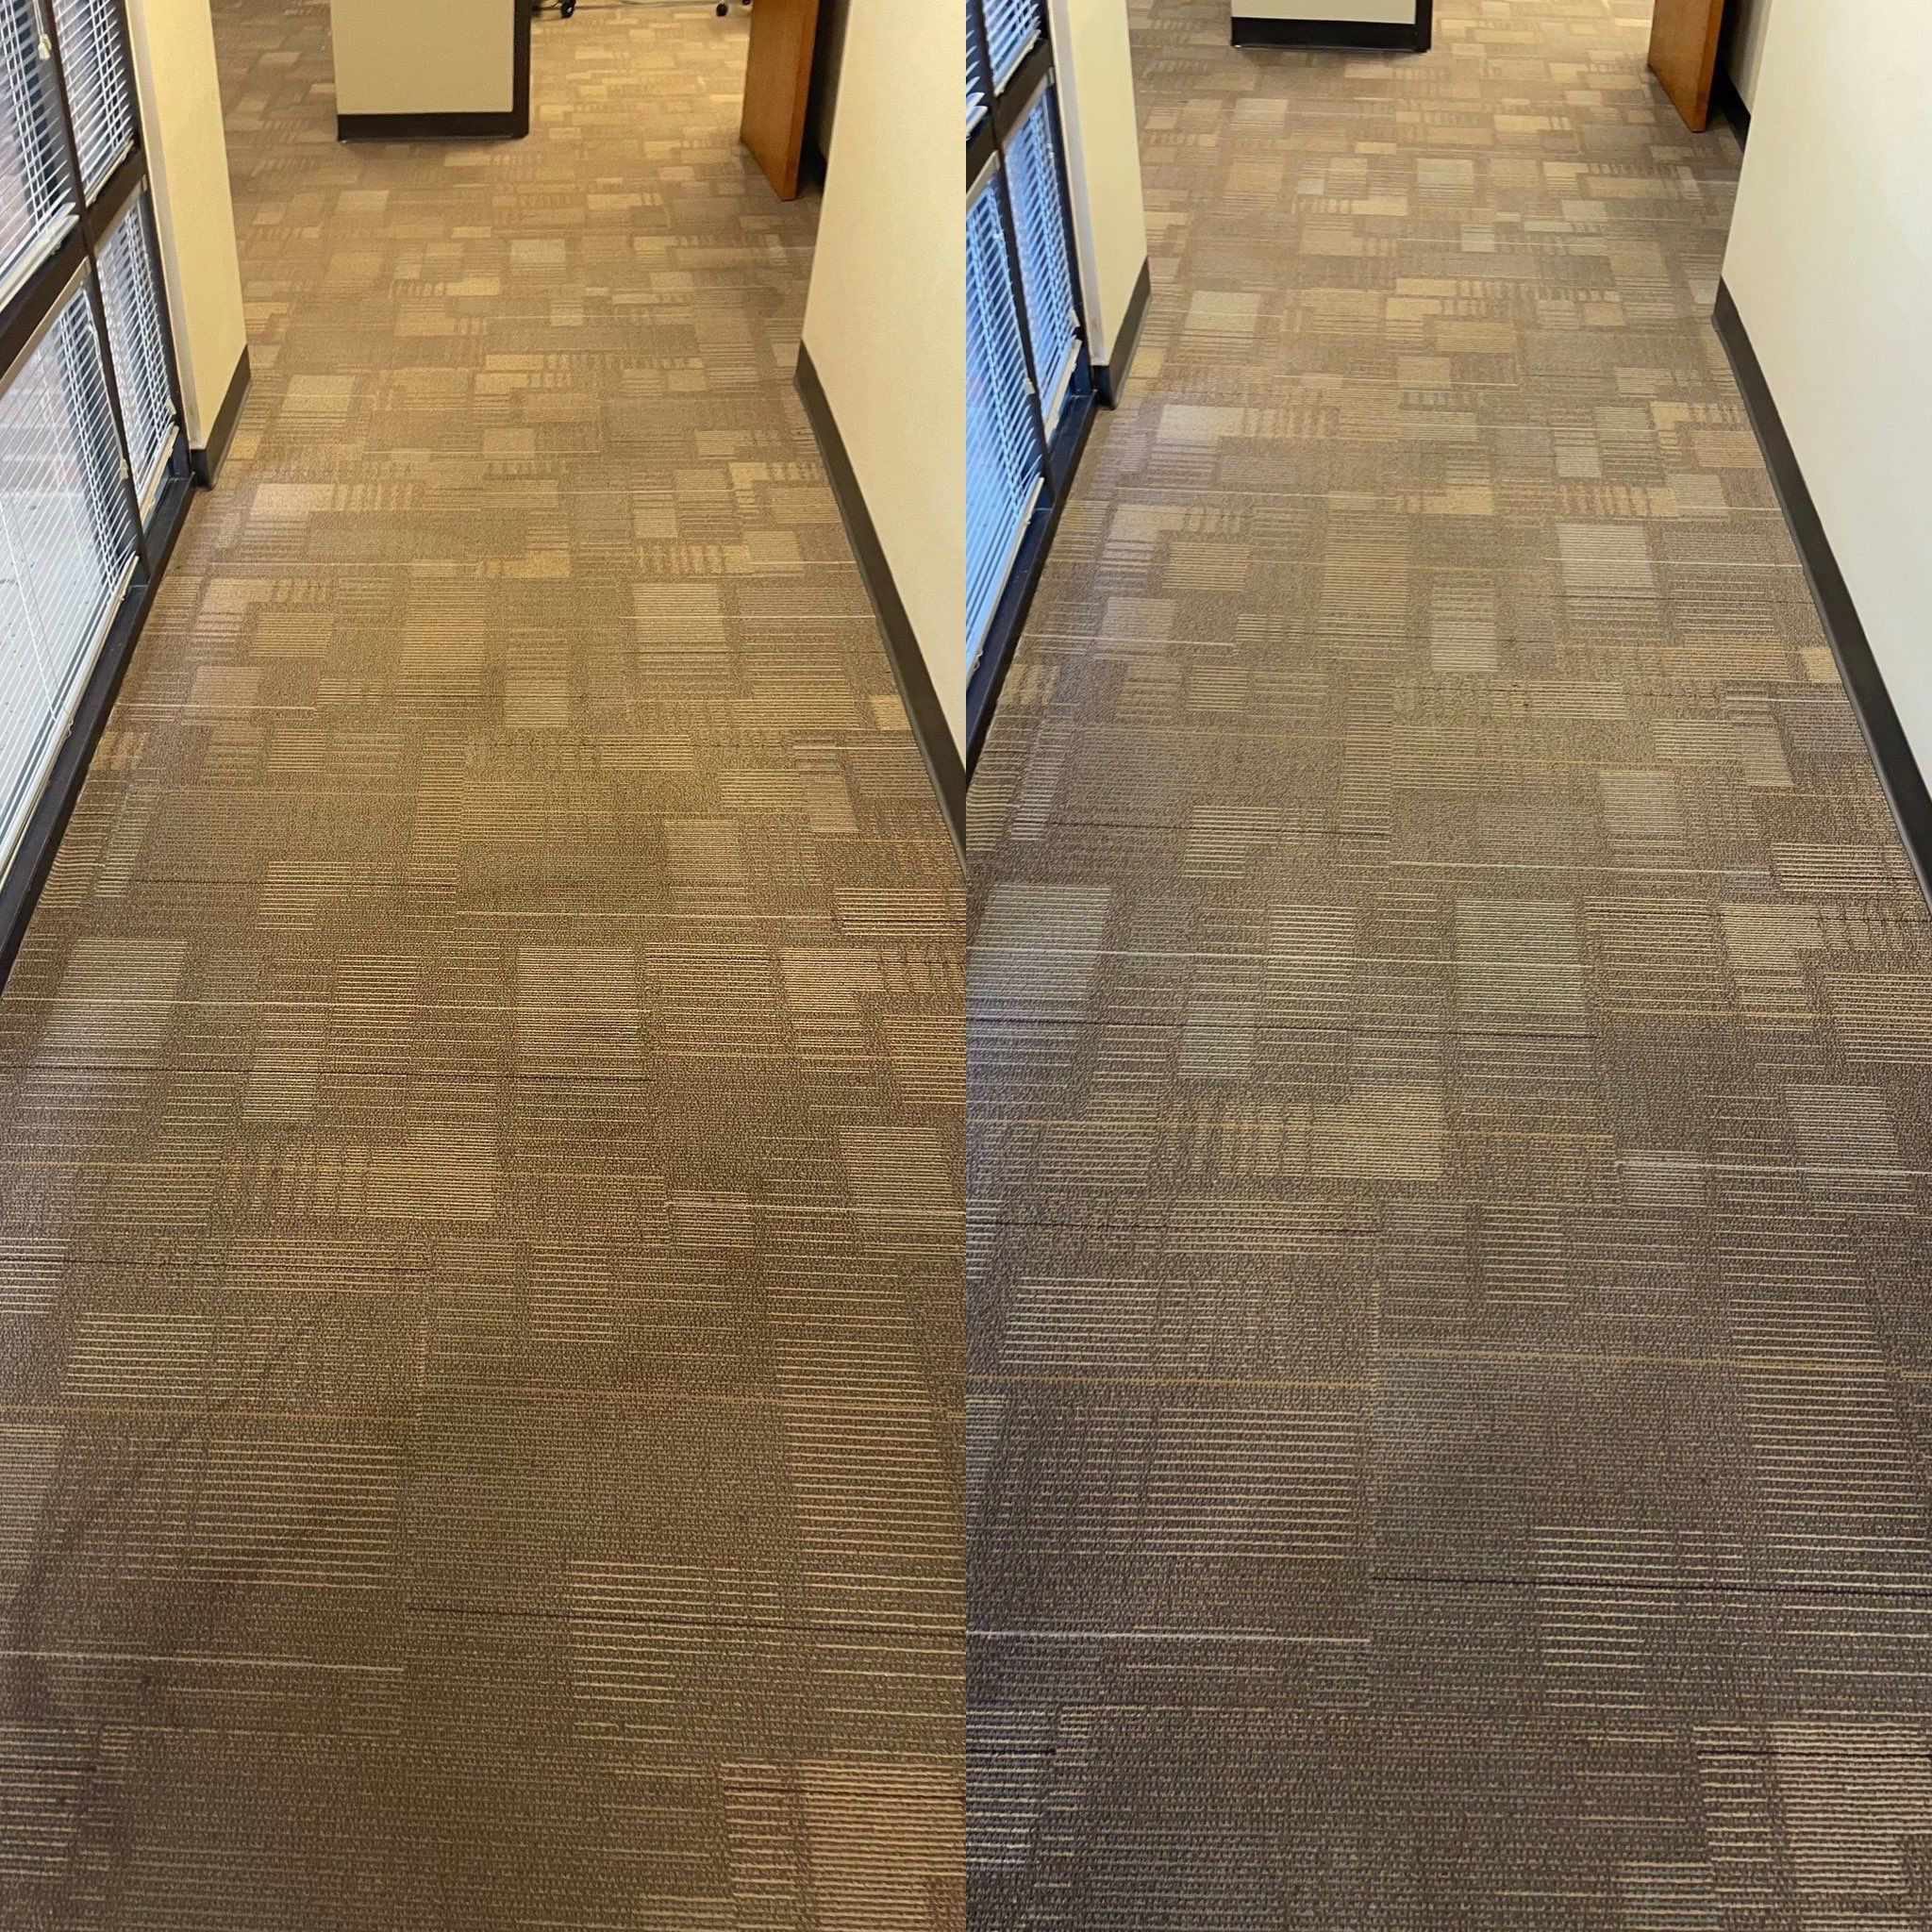 carpet cleaning service is being done in a commercial hallway with improved cleanliness and appearance on the right